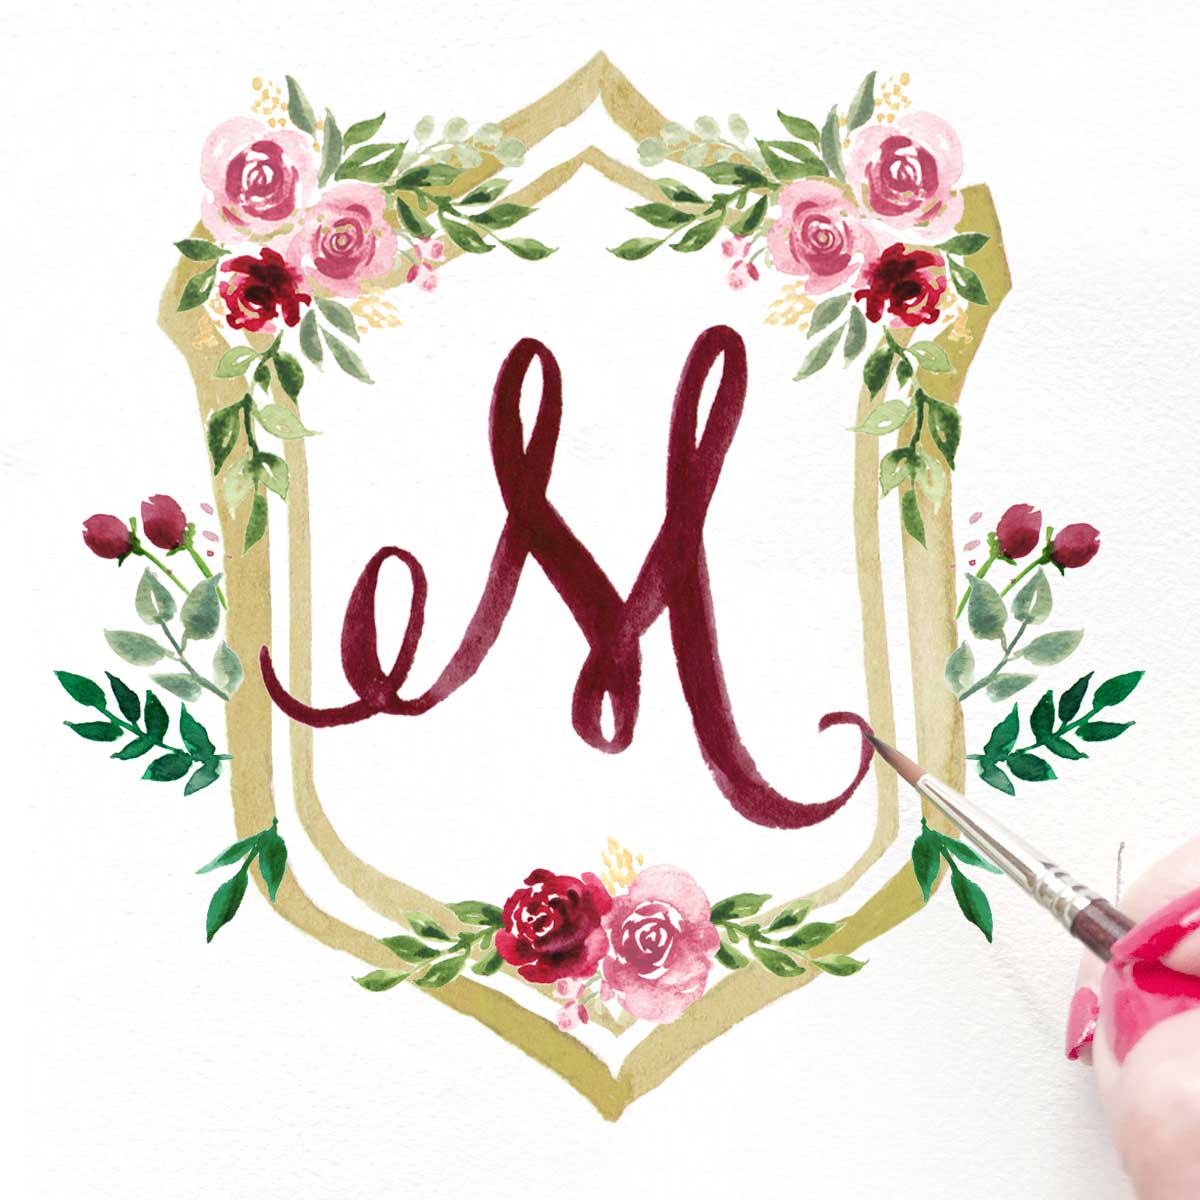 Watercolor wedding crest with burgundy flowers by Michelle Mospens. - Mospens Studio